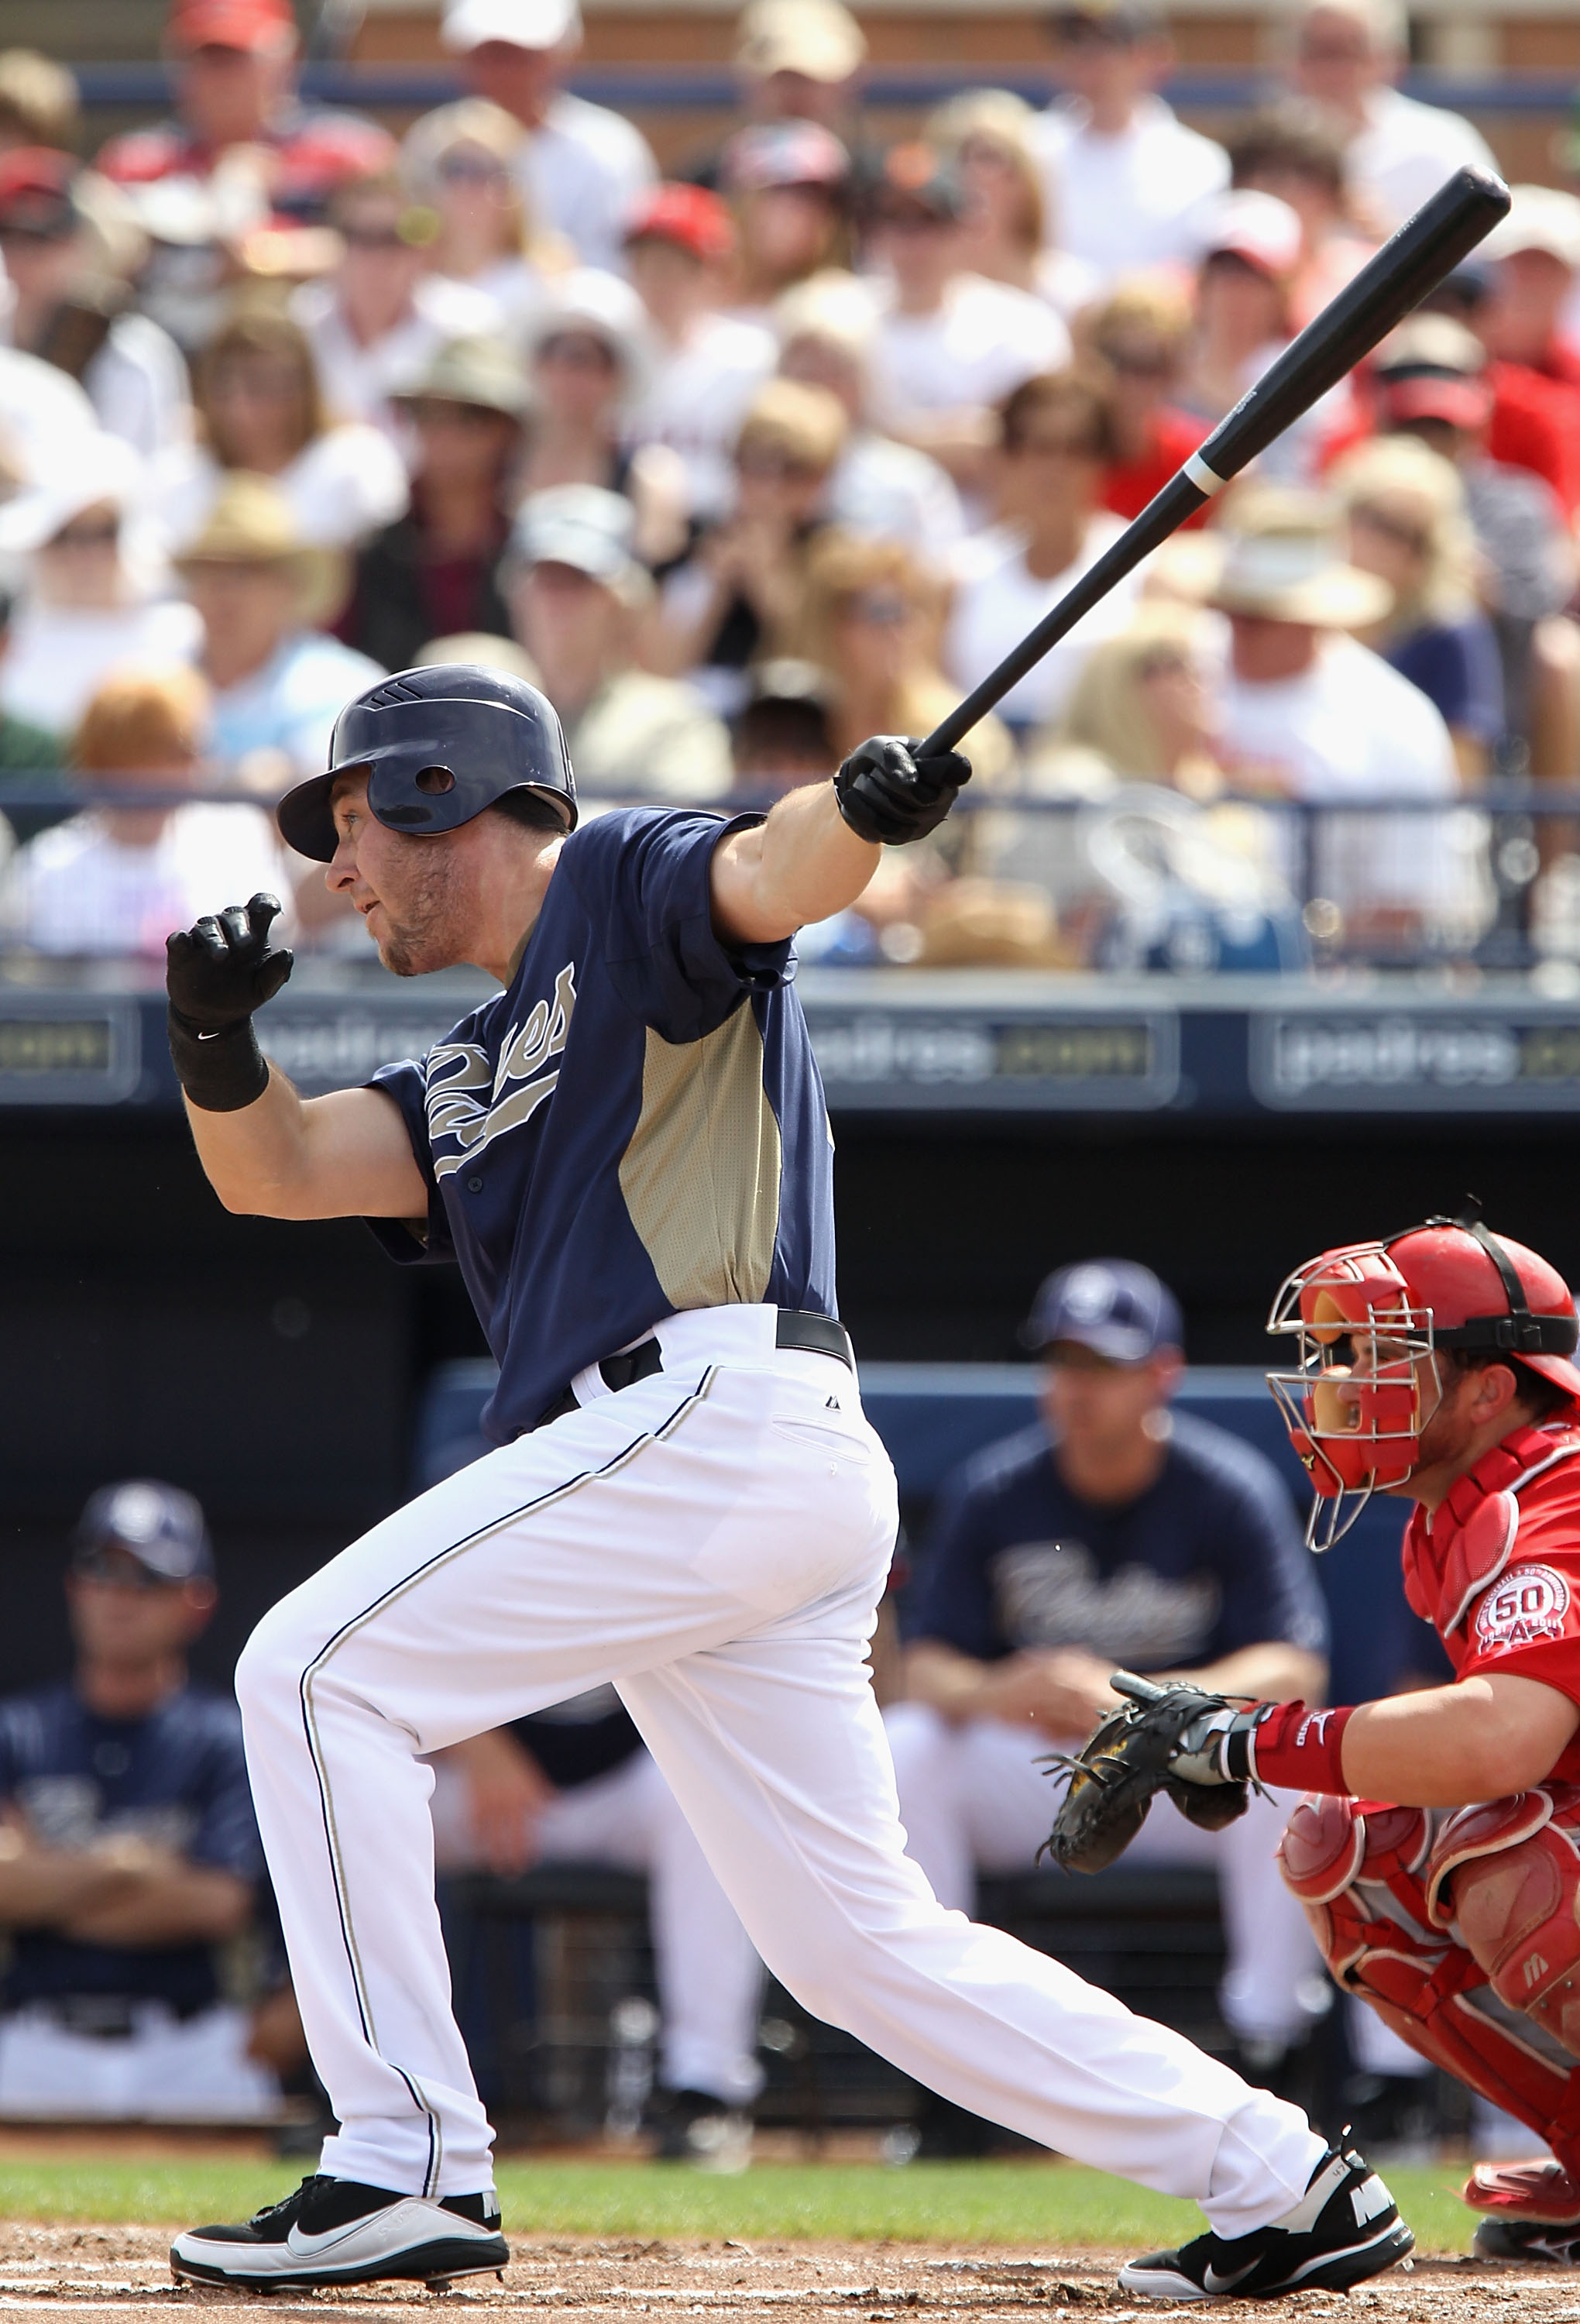 PEORIA, AZ - MARCH 15:  Ryan Ludwick #47 of the San Diego Padres hits a single against the Los Angeles Angels of Anaheim during the first inning of the spring training game at Peoria Stadium on March 15, 2011 in Peoria, Arizona.  (Photo by Christian Peter